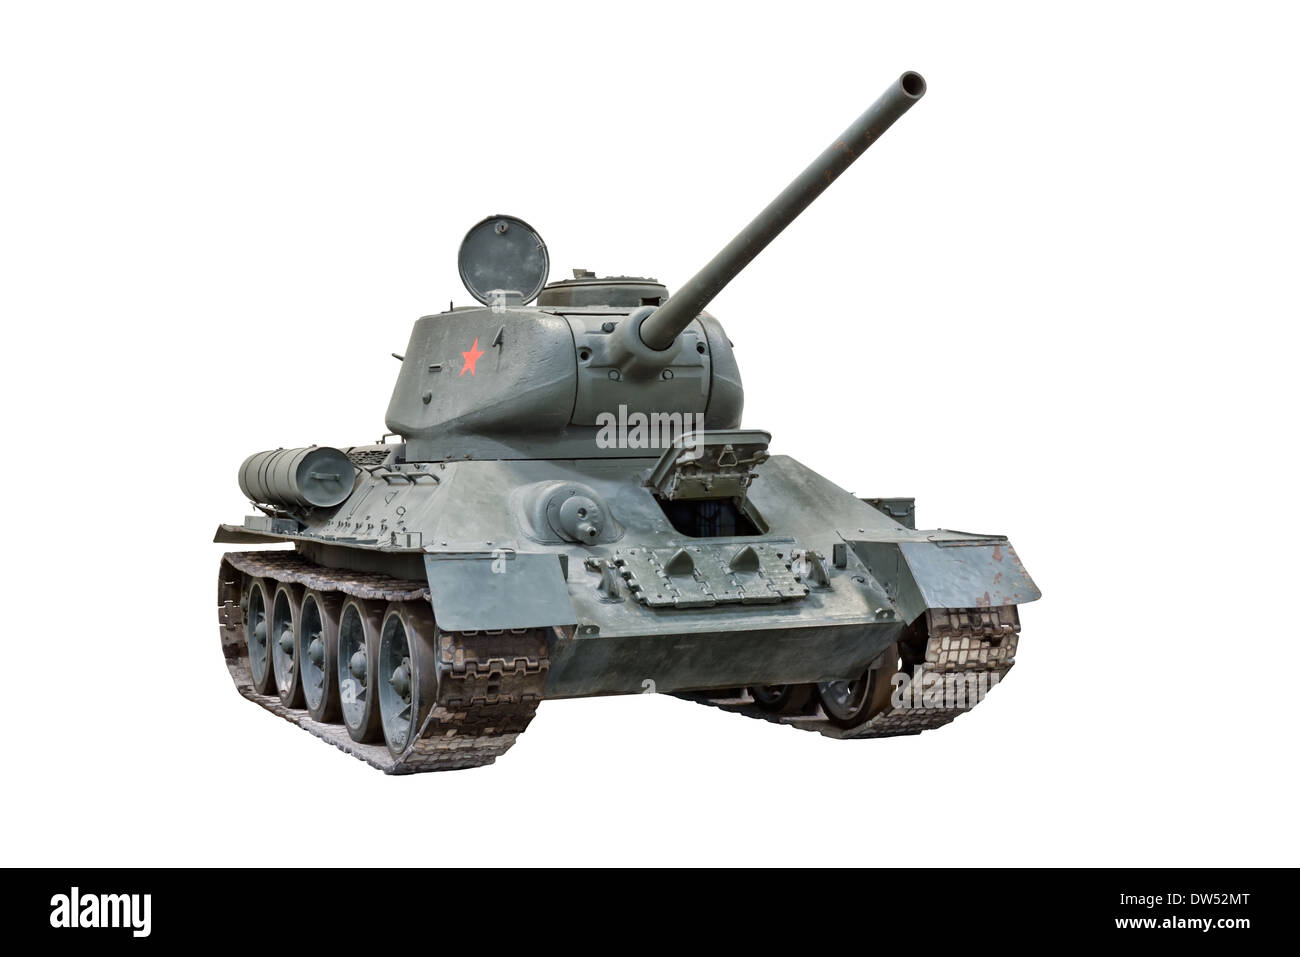 A cut out of a Soviet T 34 / 85 medium tank used by Russian forces during WW2 & other Warsaw Pact armies later Stock Photo